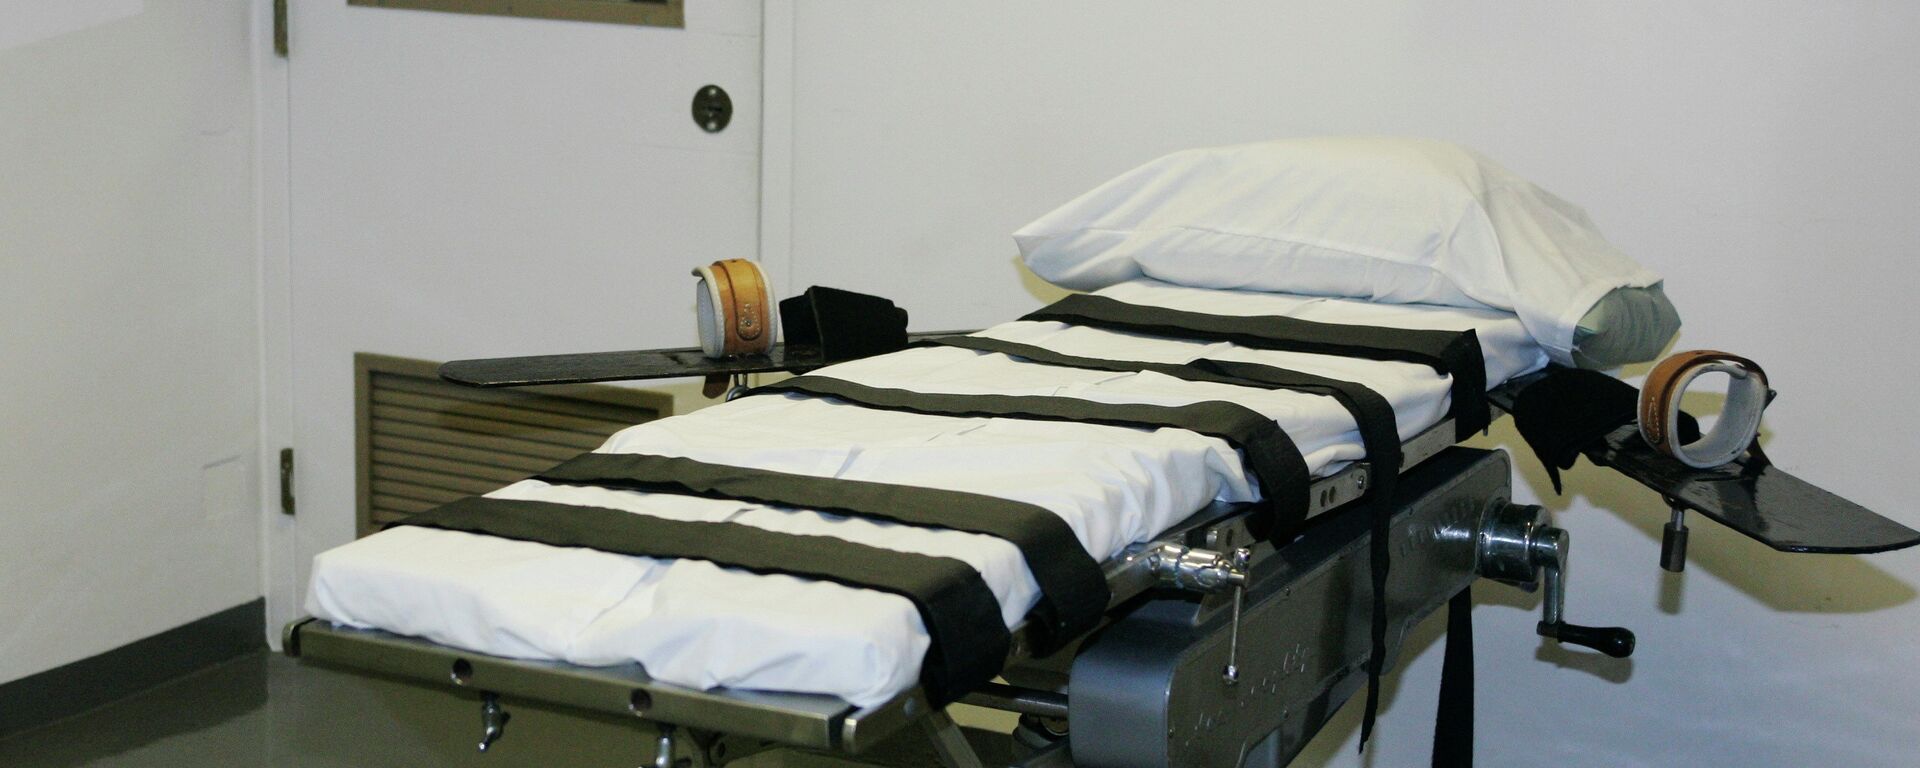 A lawsuit filed on behalf of 21 Oklahoma death row inmates on Wednesday, June 25, 2014, seeks to halt any attempt to execute them using the state's current lethal injection protocols, which it claims presents a risk of severe pain and suffering. - Sputnik International, 1920, 28.06.2022